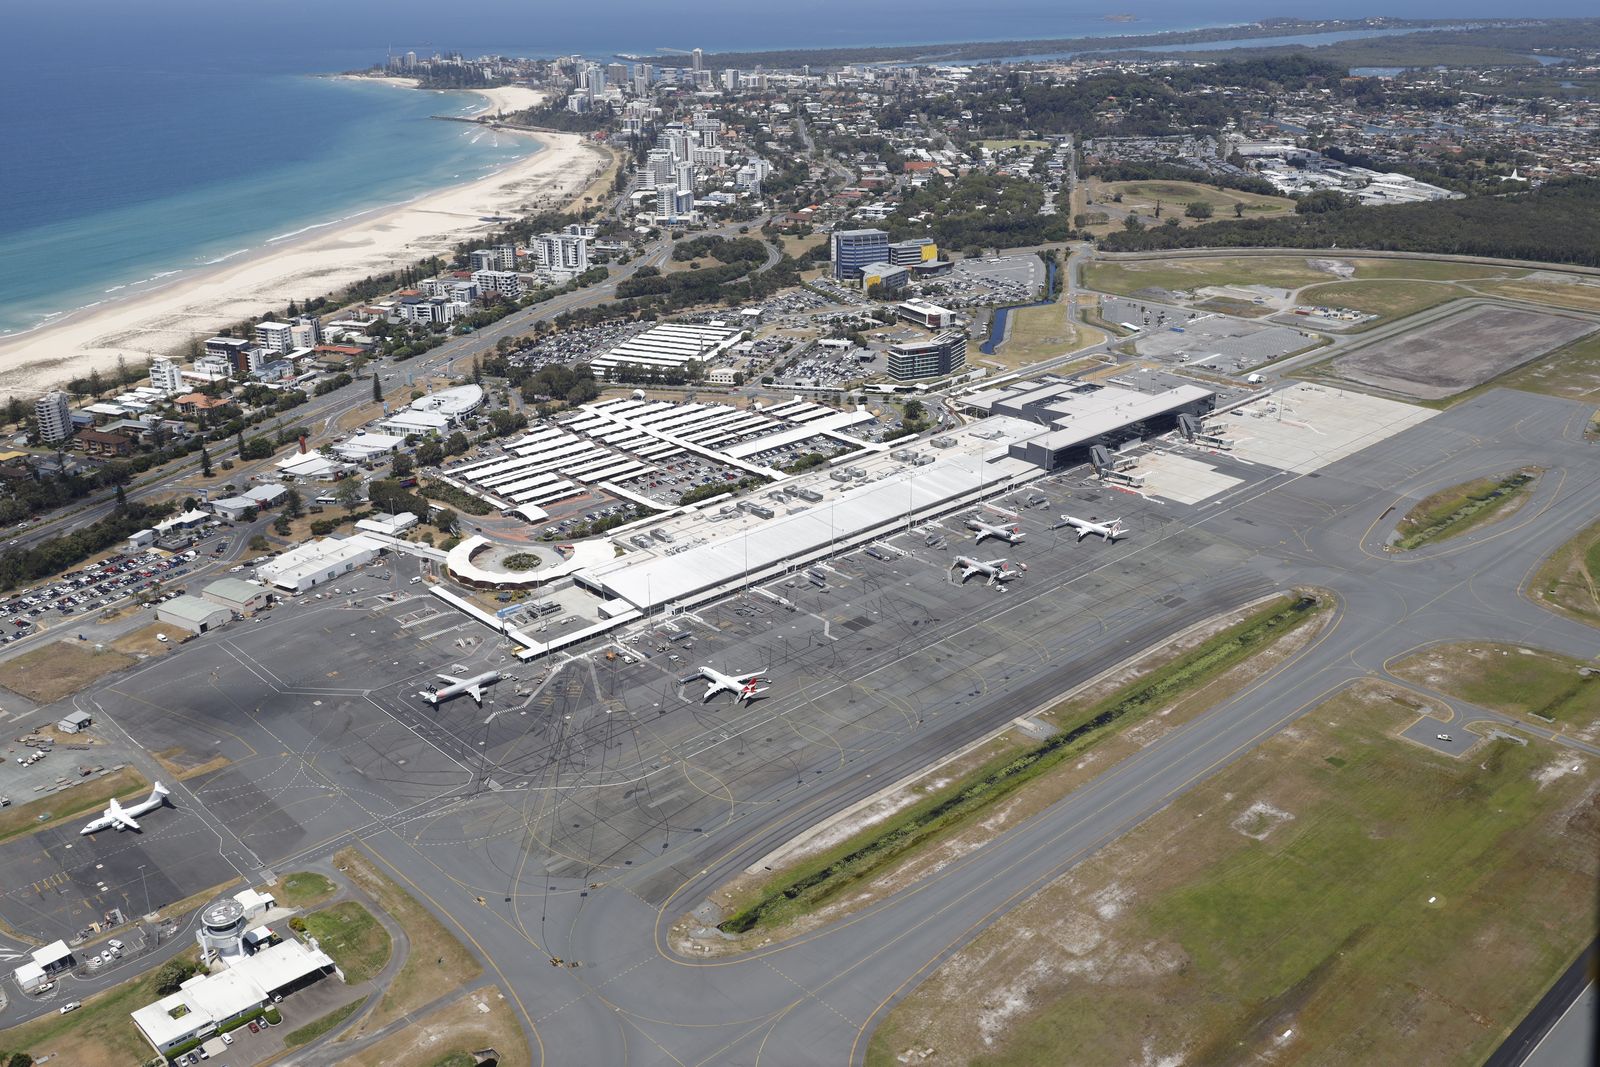 Gold Coast Airport is the sixth busiest airport in Australia